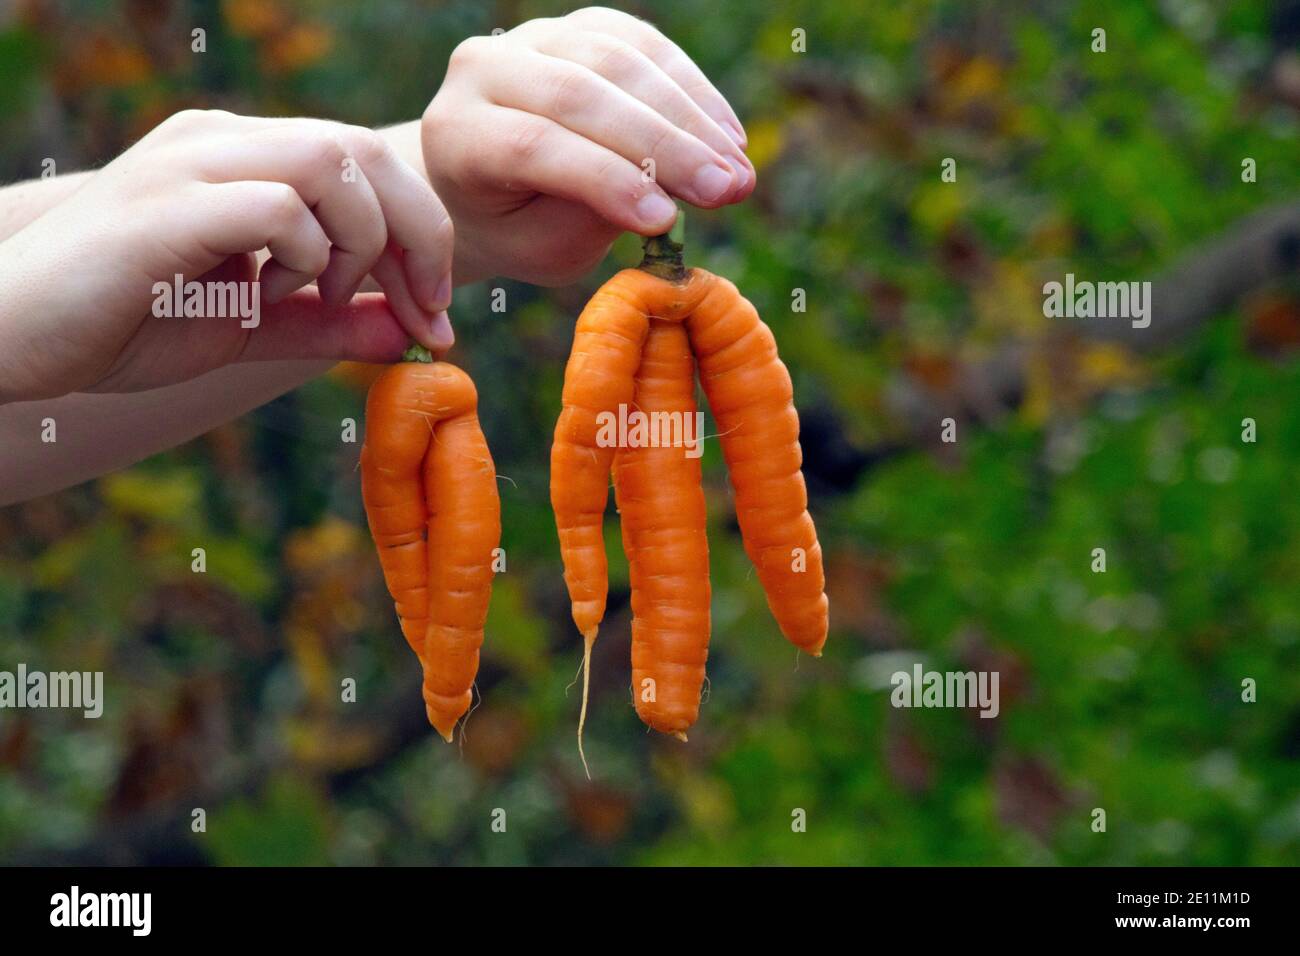 Close-up of hands holding two different homegrown mutant carrots, one with two parts and another one with three parts Stock Photo